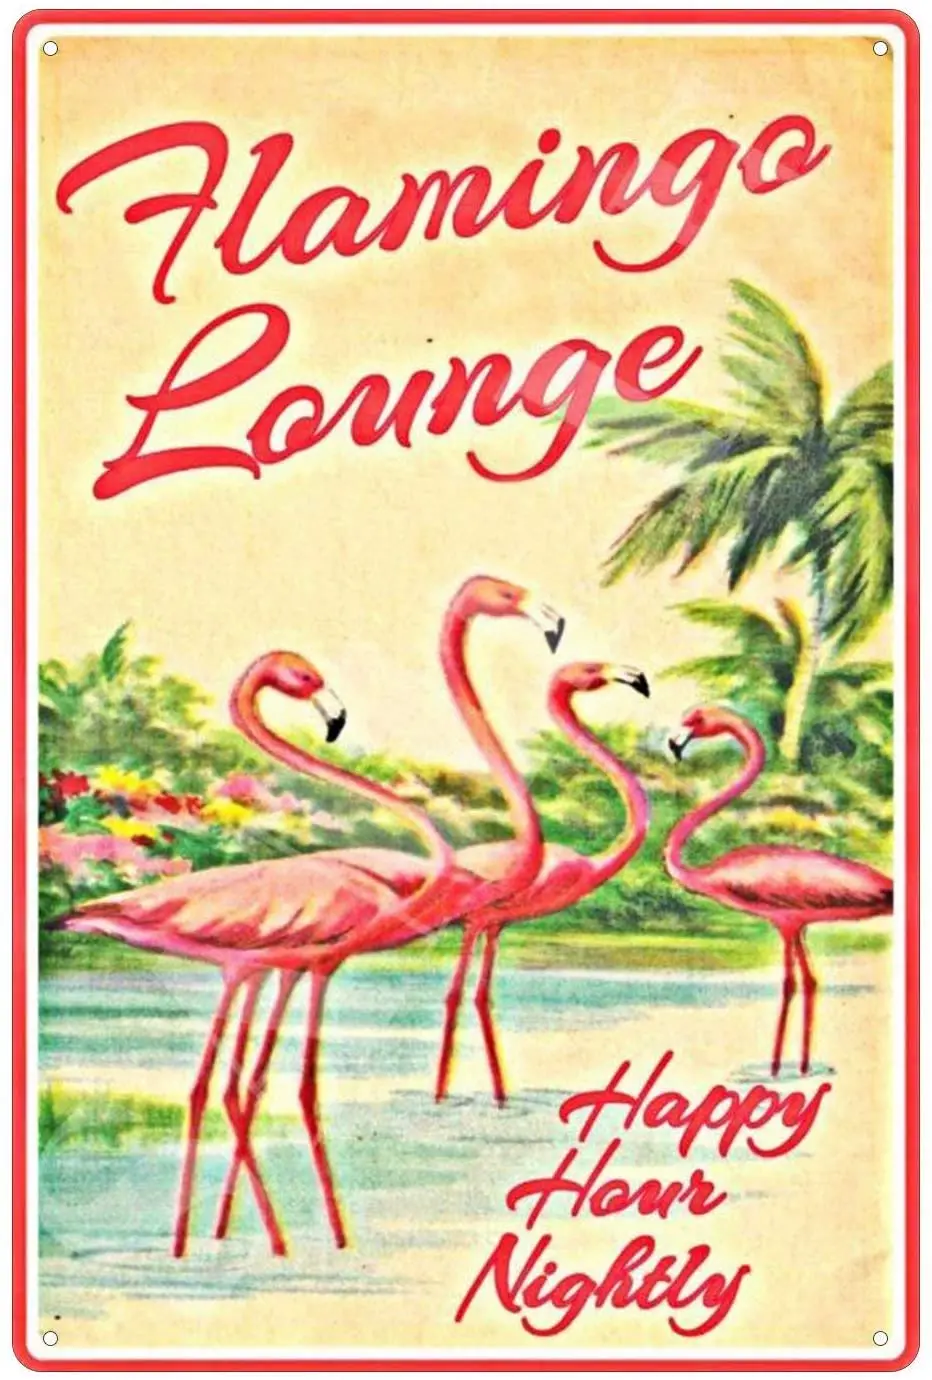 

Tin Sign Wall Decor Metal Signs Novelty Pink Flamingo Bar & Grill Retro Vintage Signsative Country Home Gift 12x12 Inches